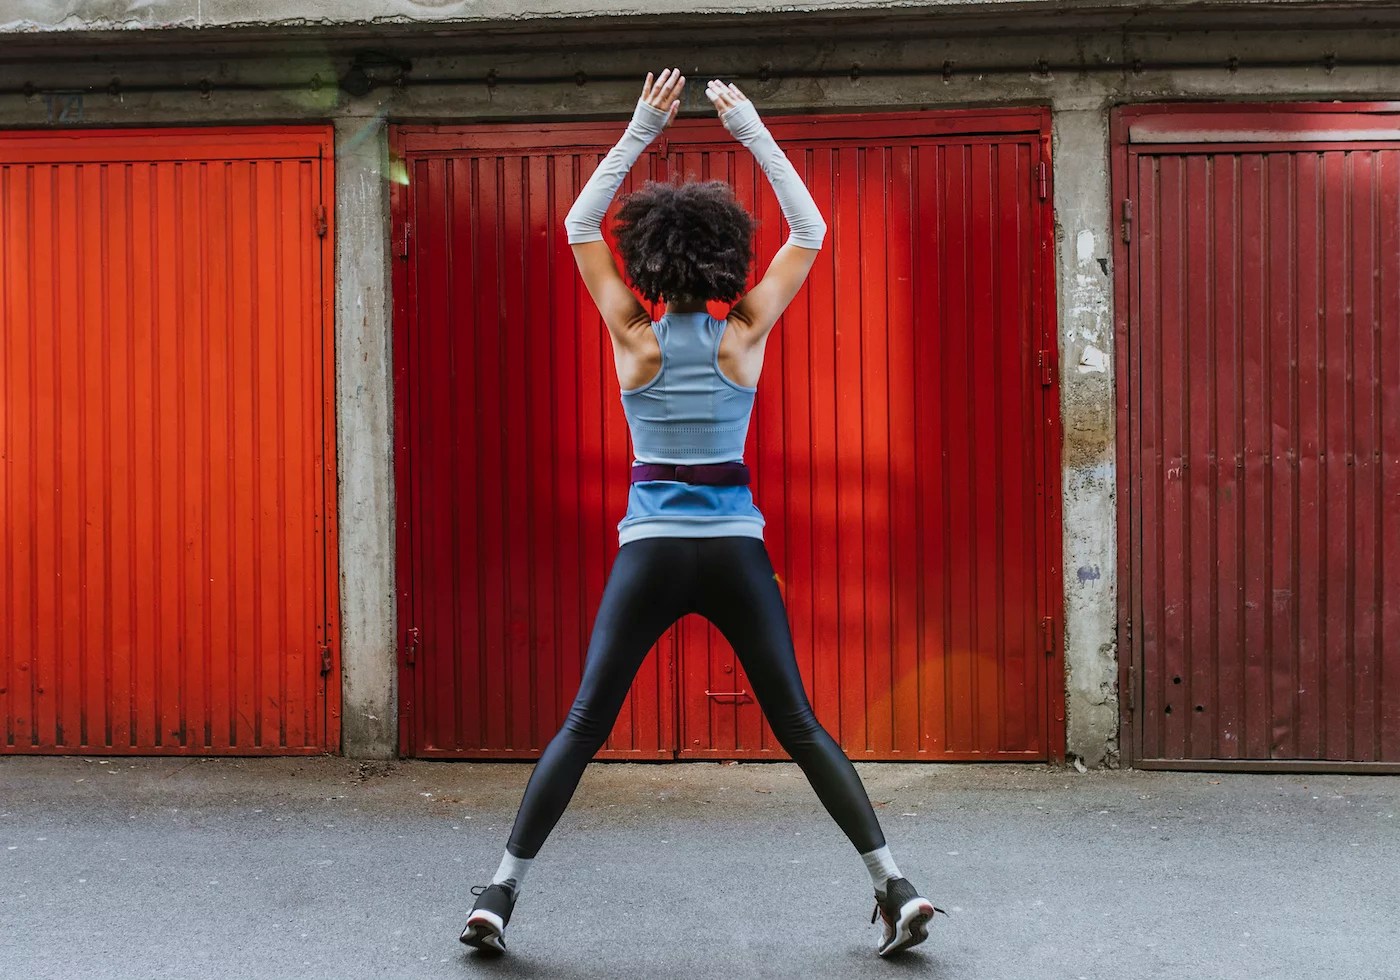 How To Do Jumping Jacks (+ Video): Benefits, Risks & Expert Tips